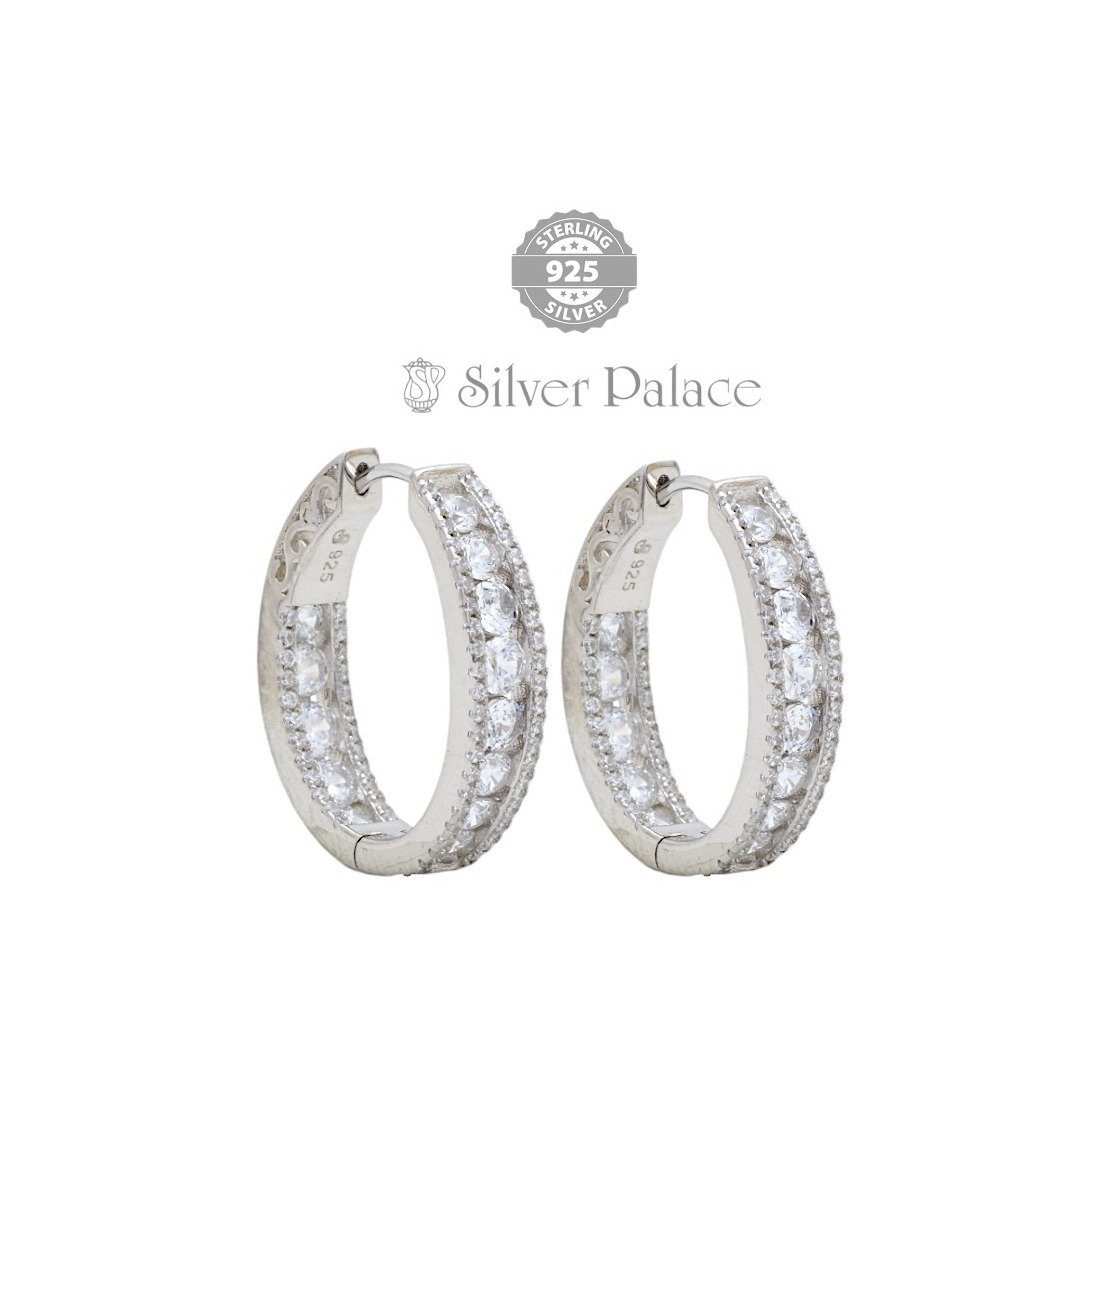 92.5 Sterling Silver Front and Back Diamond Hoop Earrings